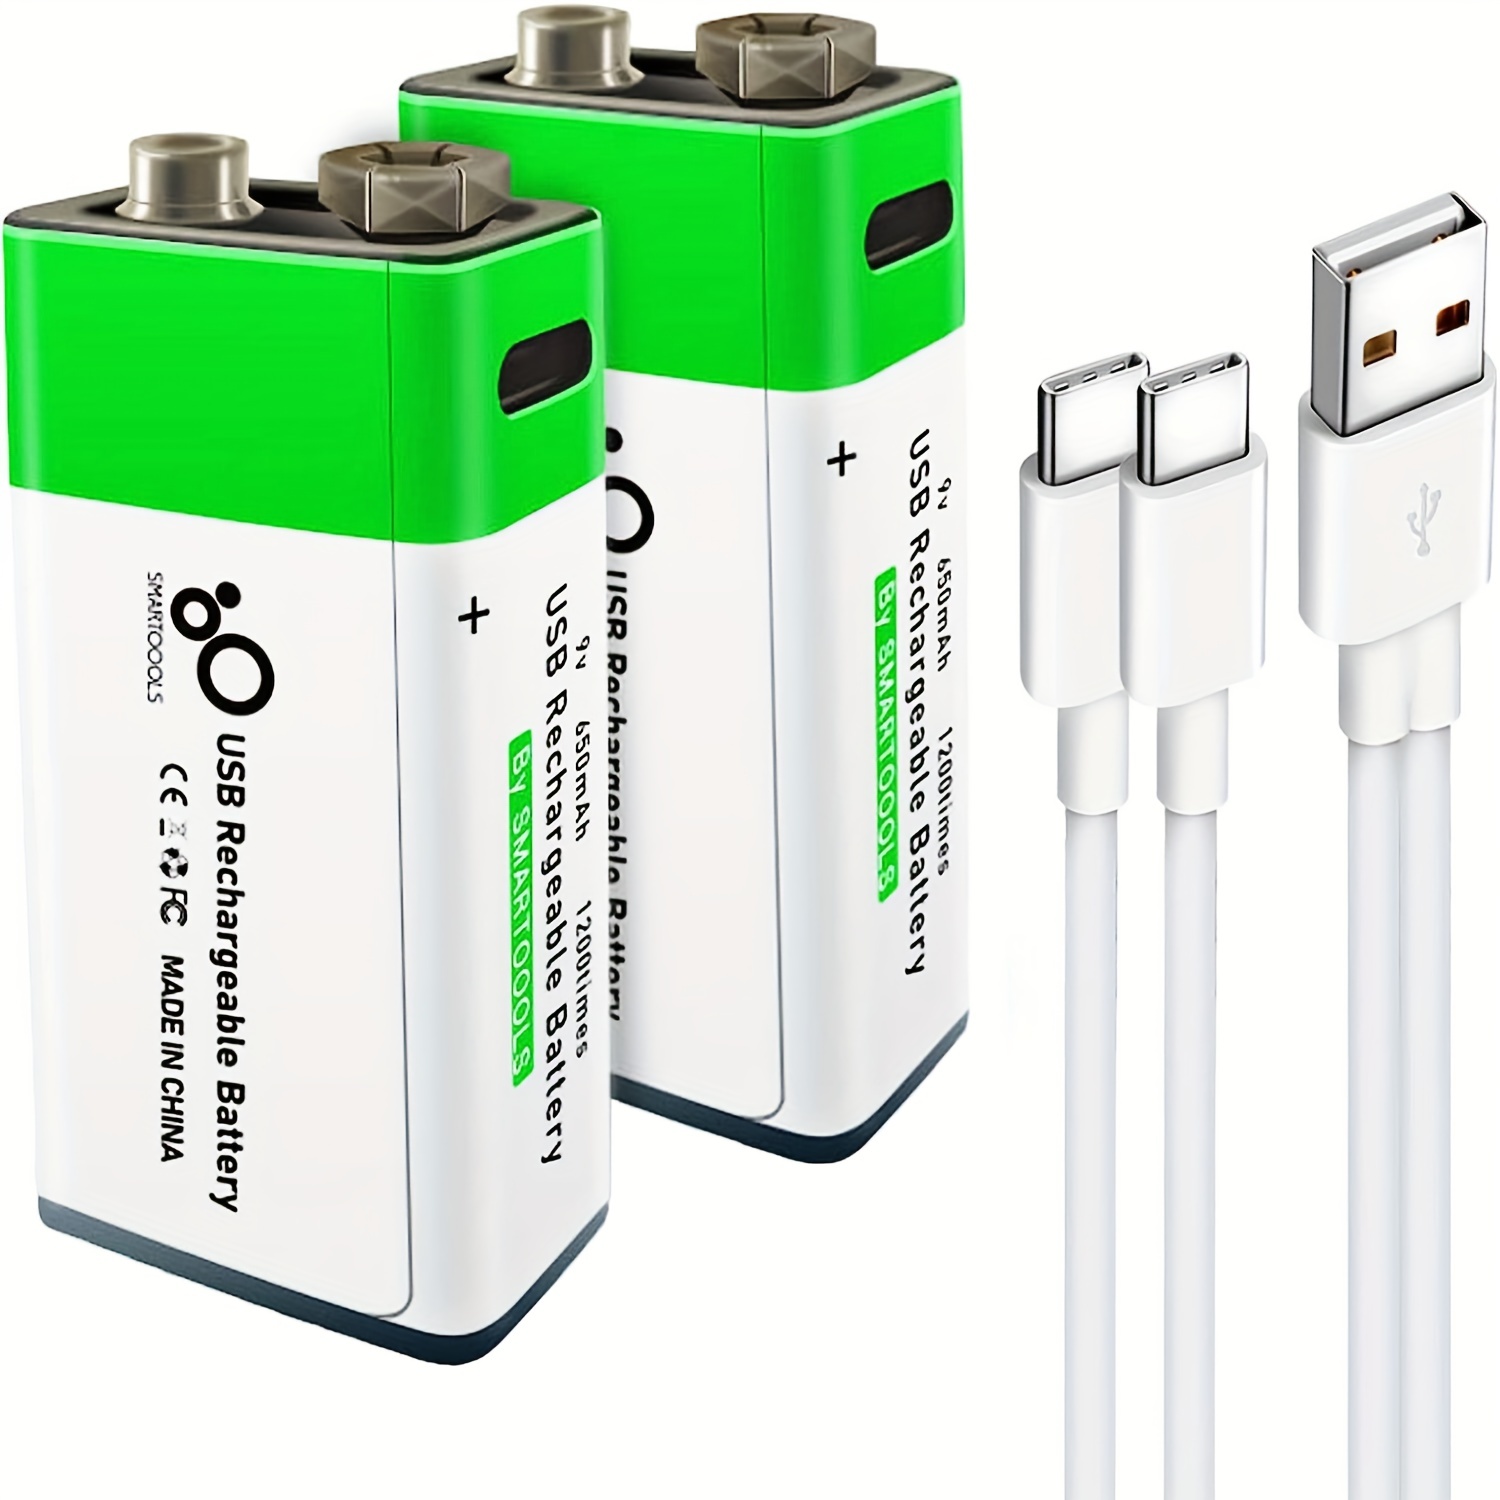 

1/2pcs, 9v Battery, Usb 9v Battery, Usb 9v Lithium Ion Rechargeable Battery, High Capacity 650mah Rechargeable 9v Battery, 1.5 H Fast Charge, 1200 Cycle With Type C Port Cable